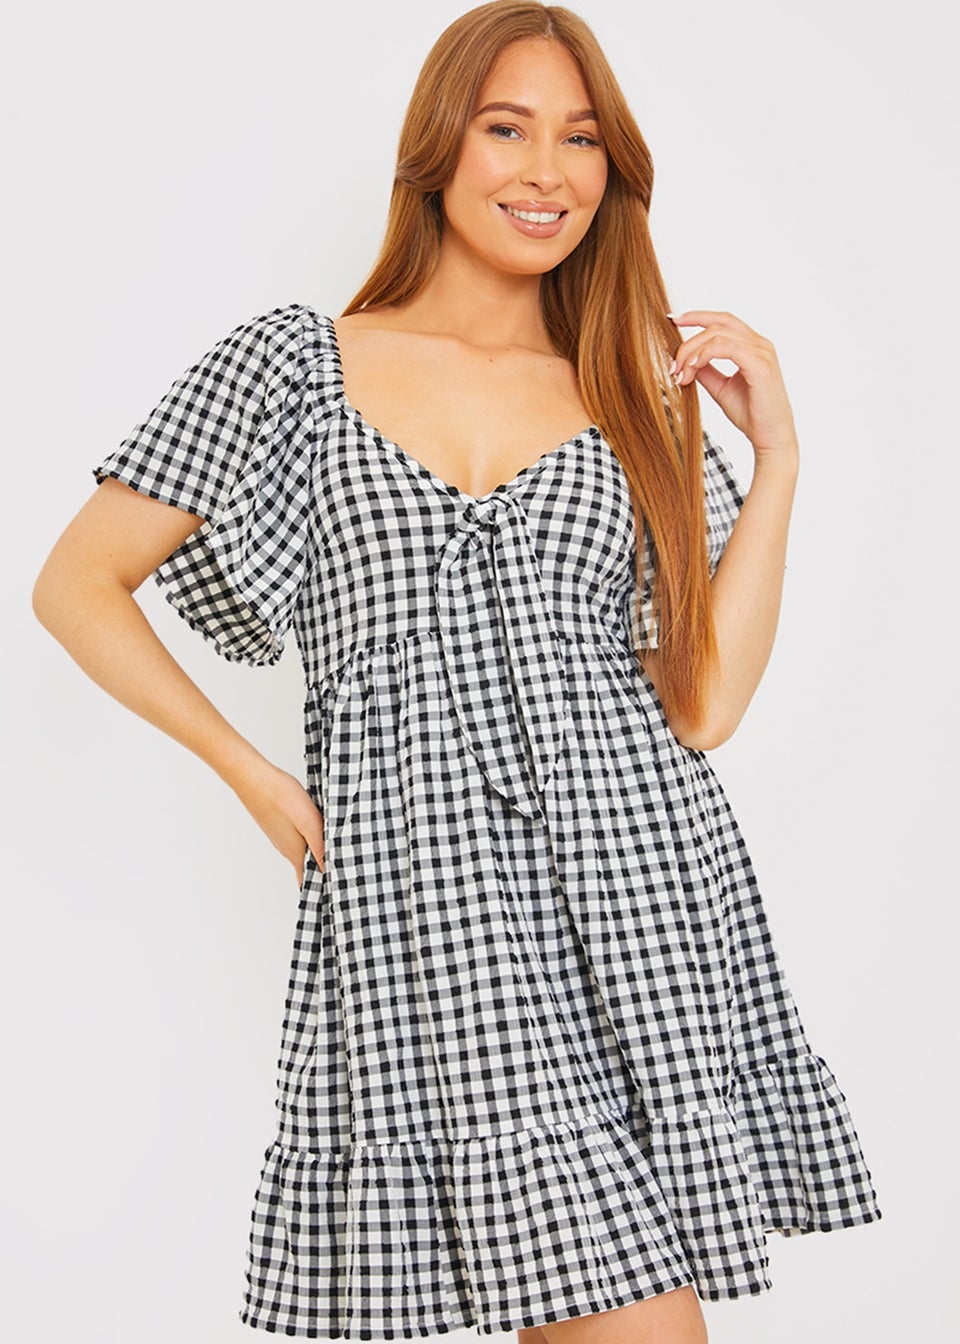 In The Style Stacey Black & White Tie Bust Mini Dress